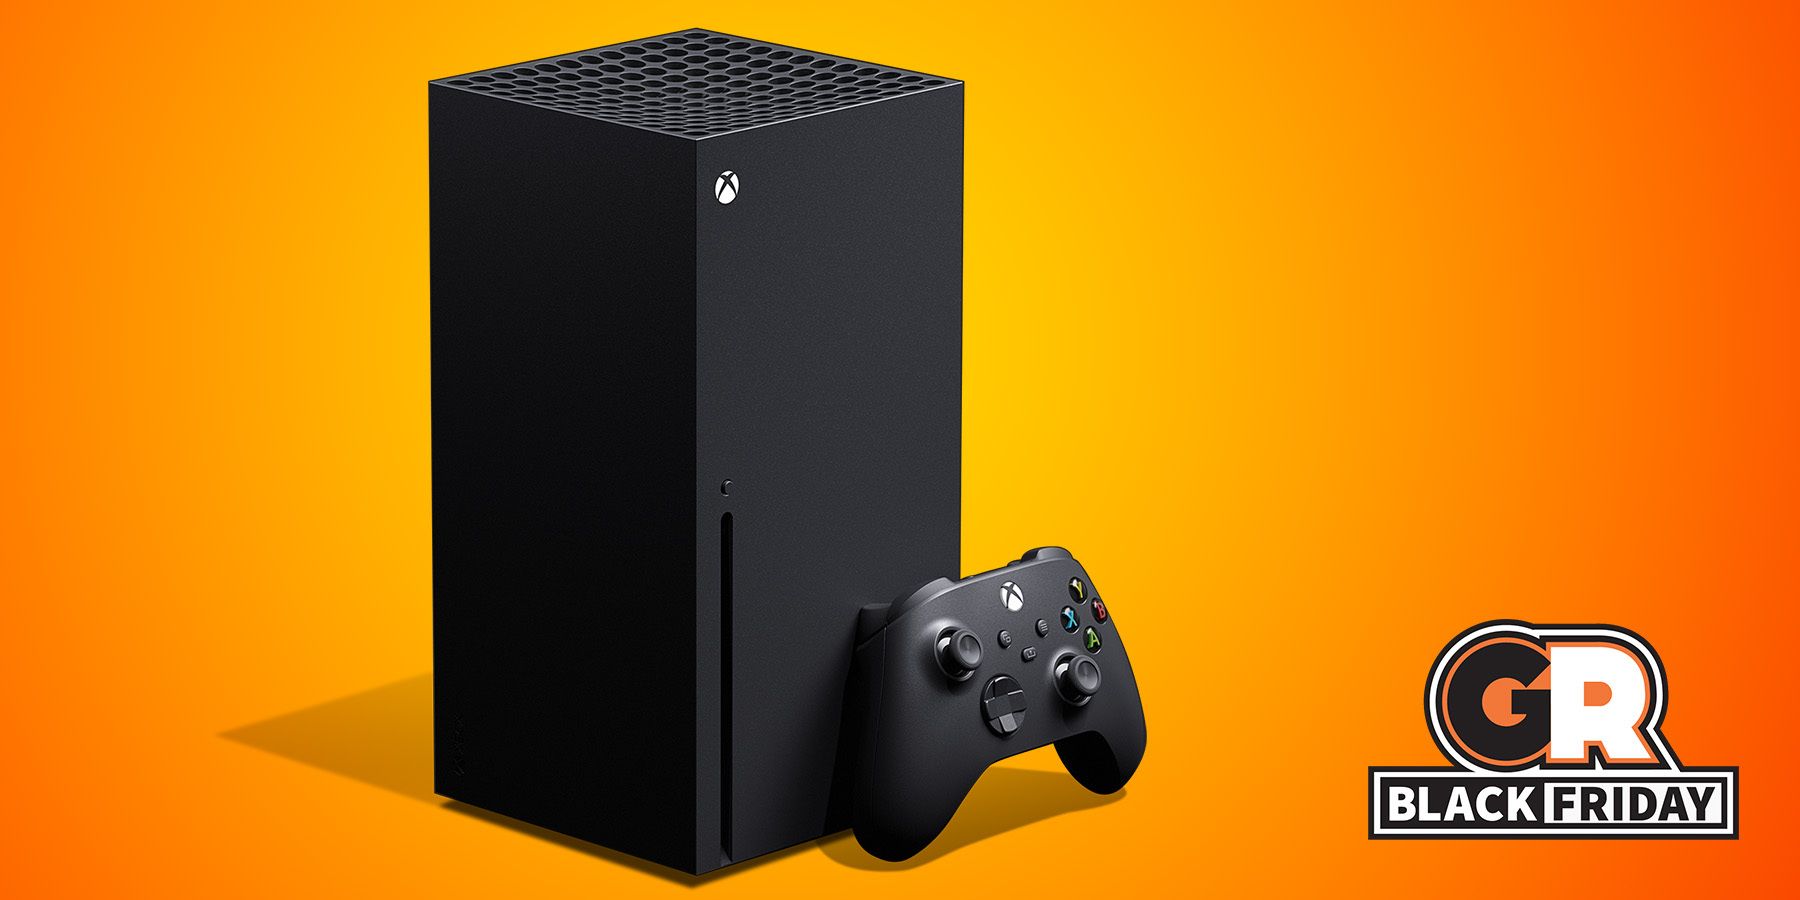 Should You Buy an Xbox Series X This Black Friday?